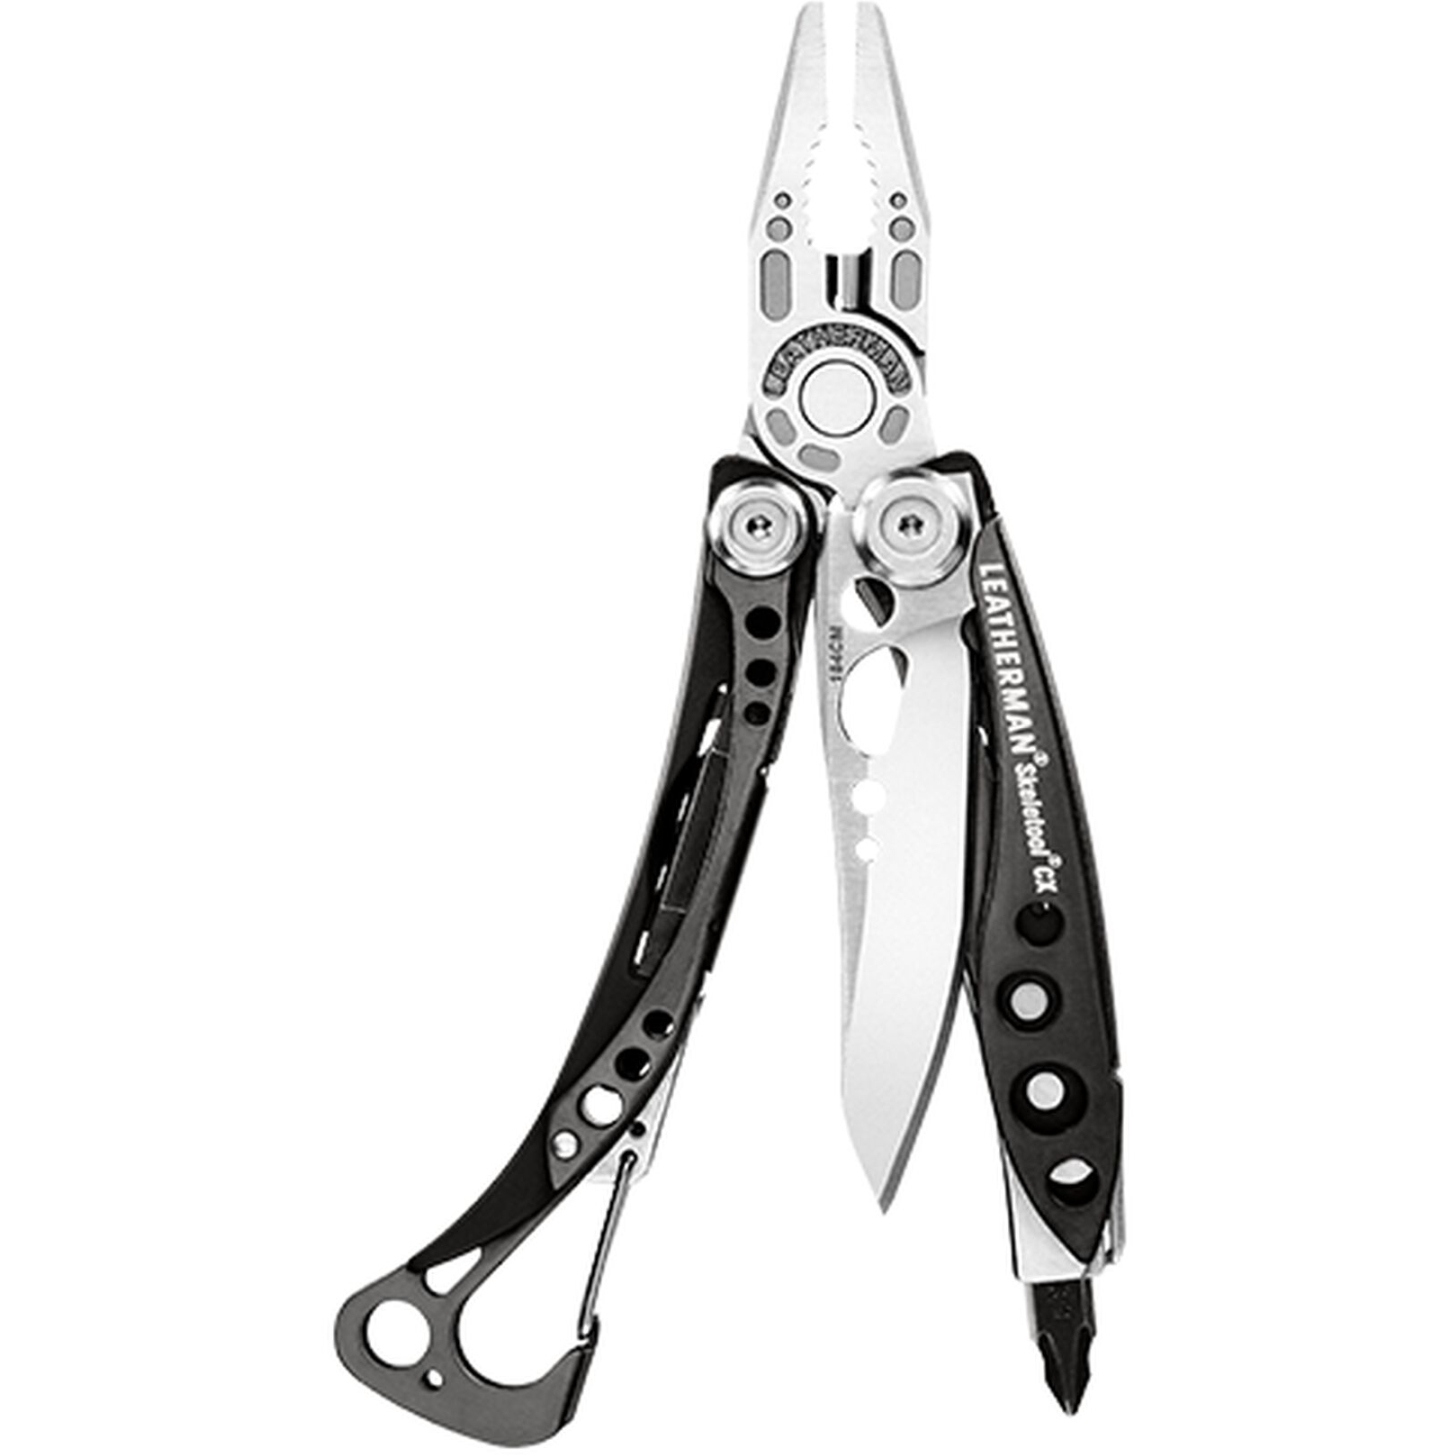 Picture of Leatherman Skeletool CX Multitool - Carbon